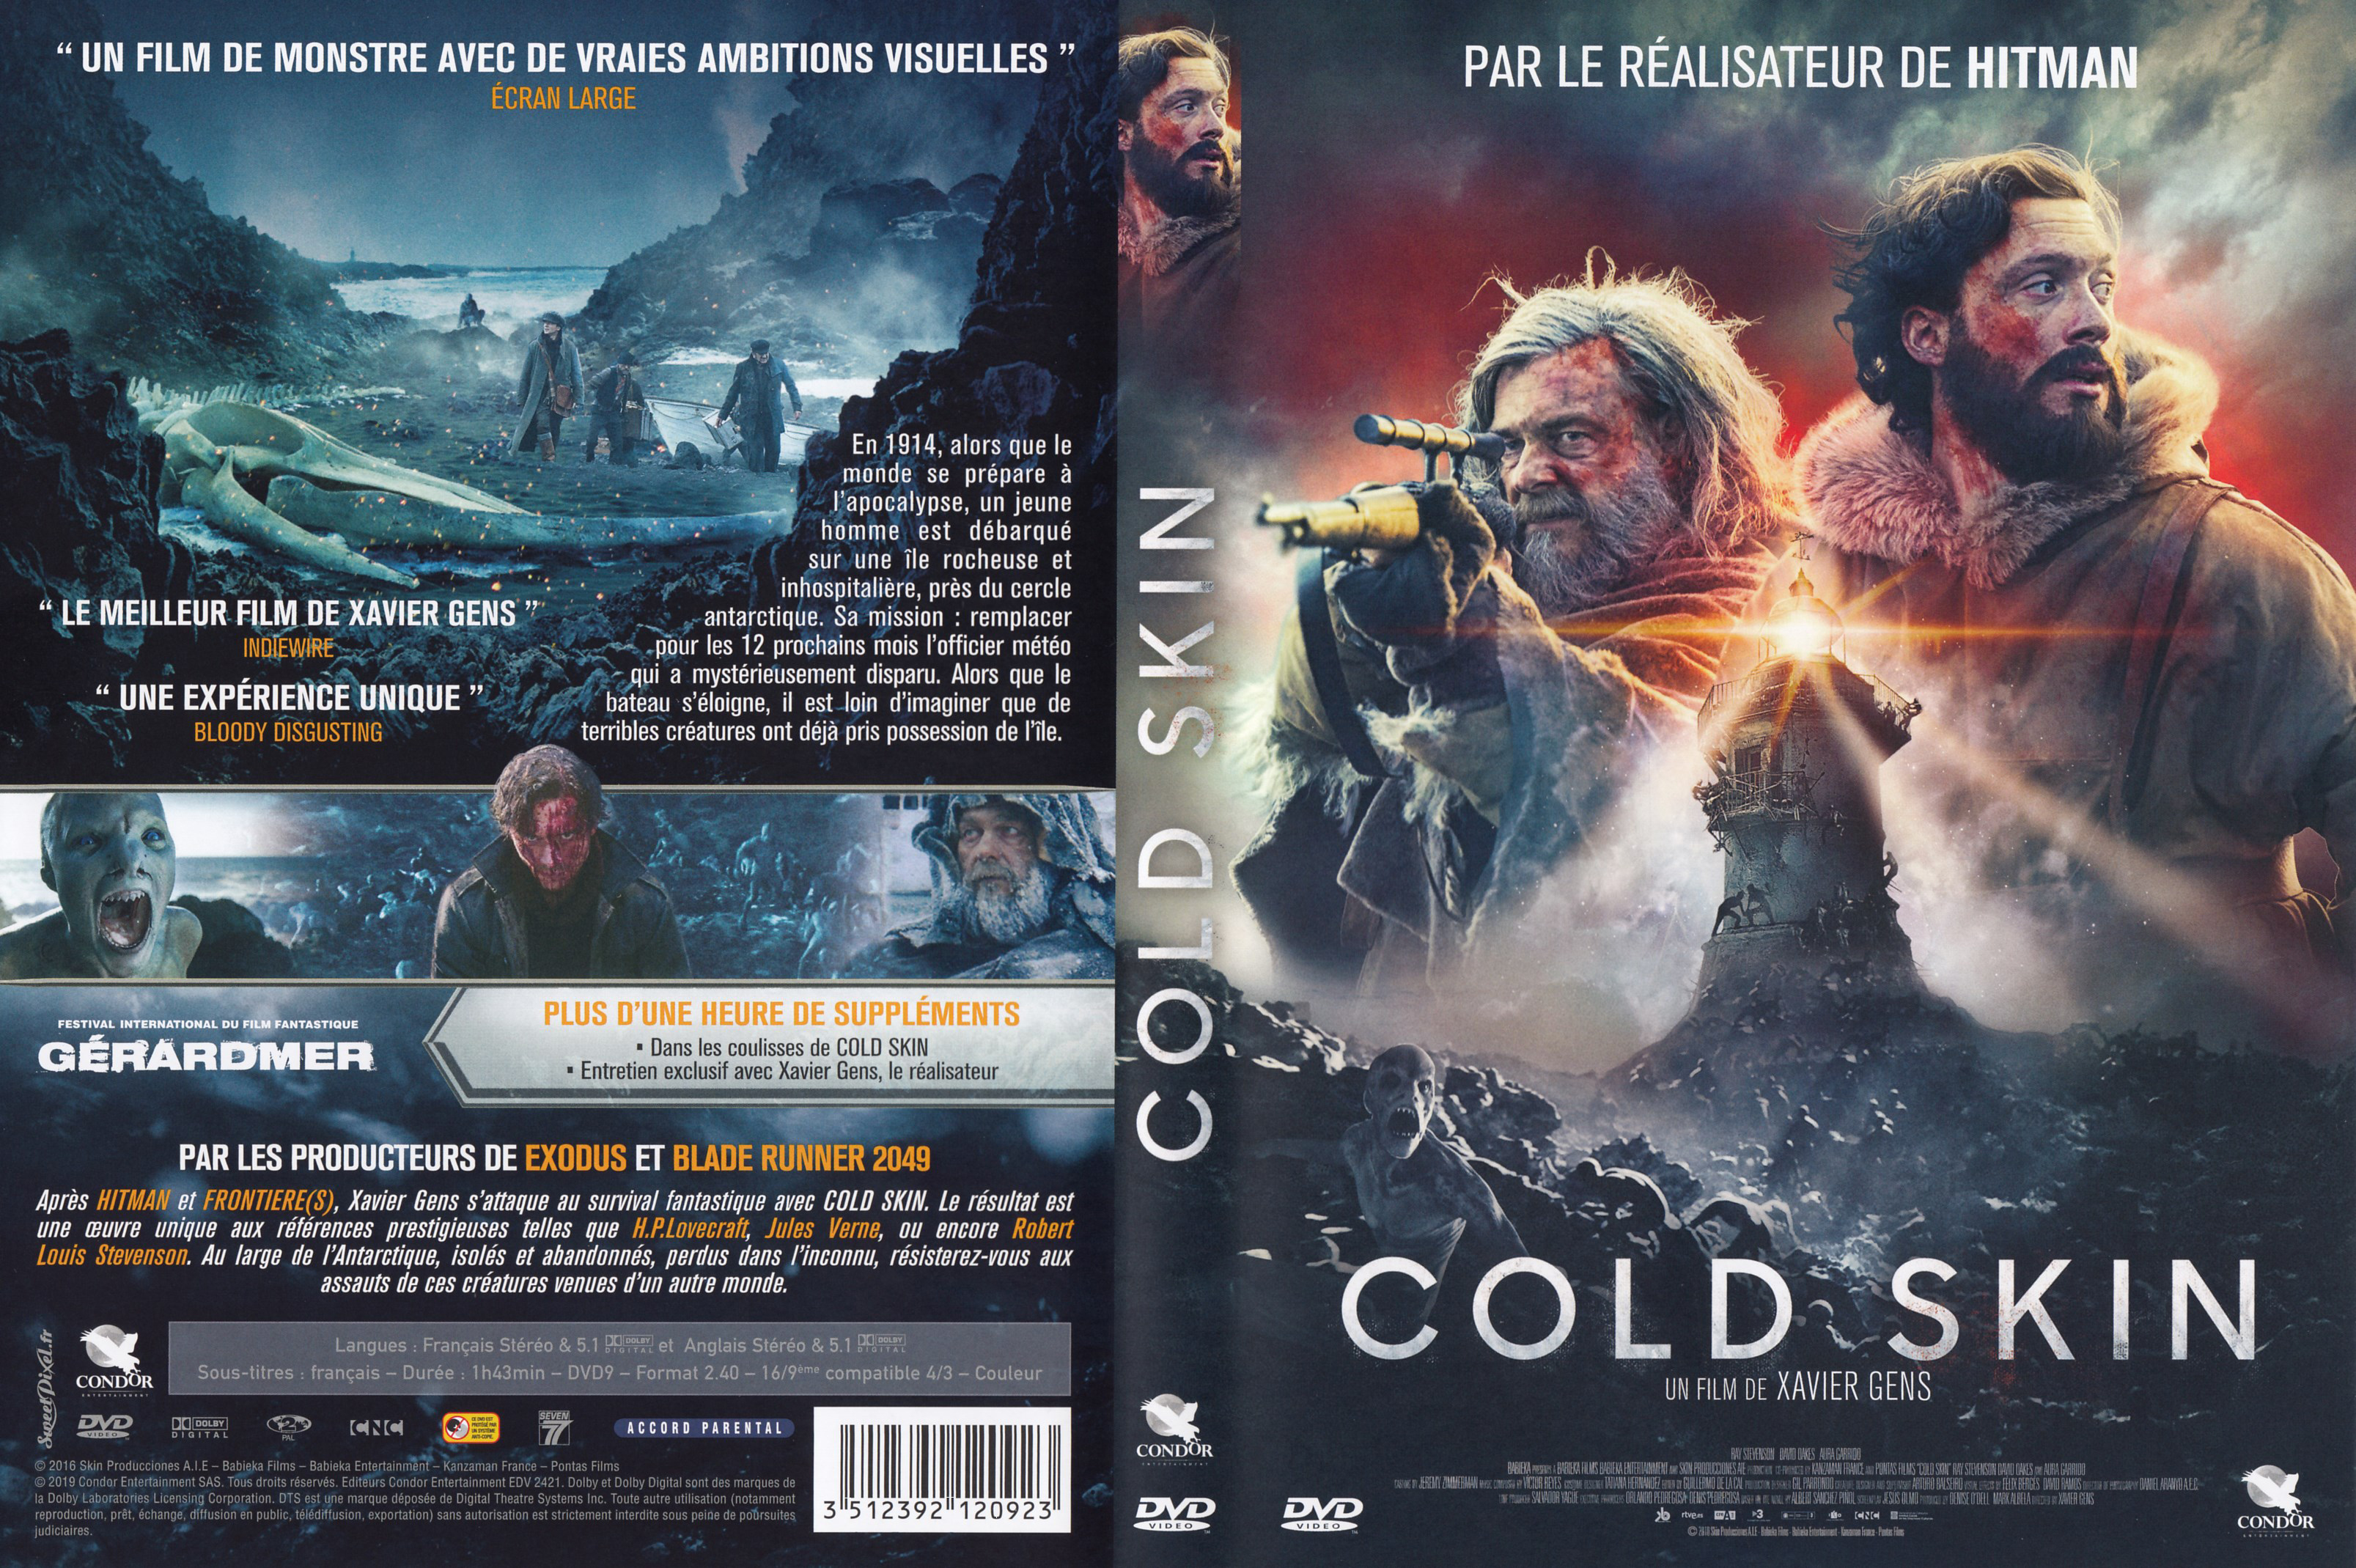 Jaquette DVD Cold skin